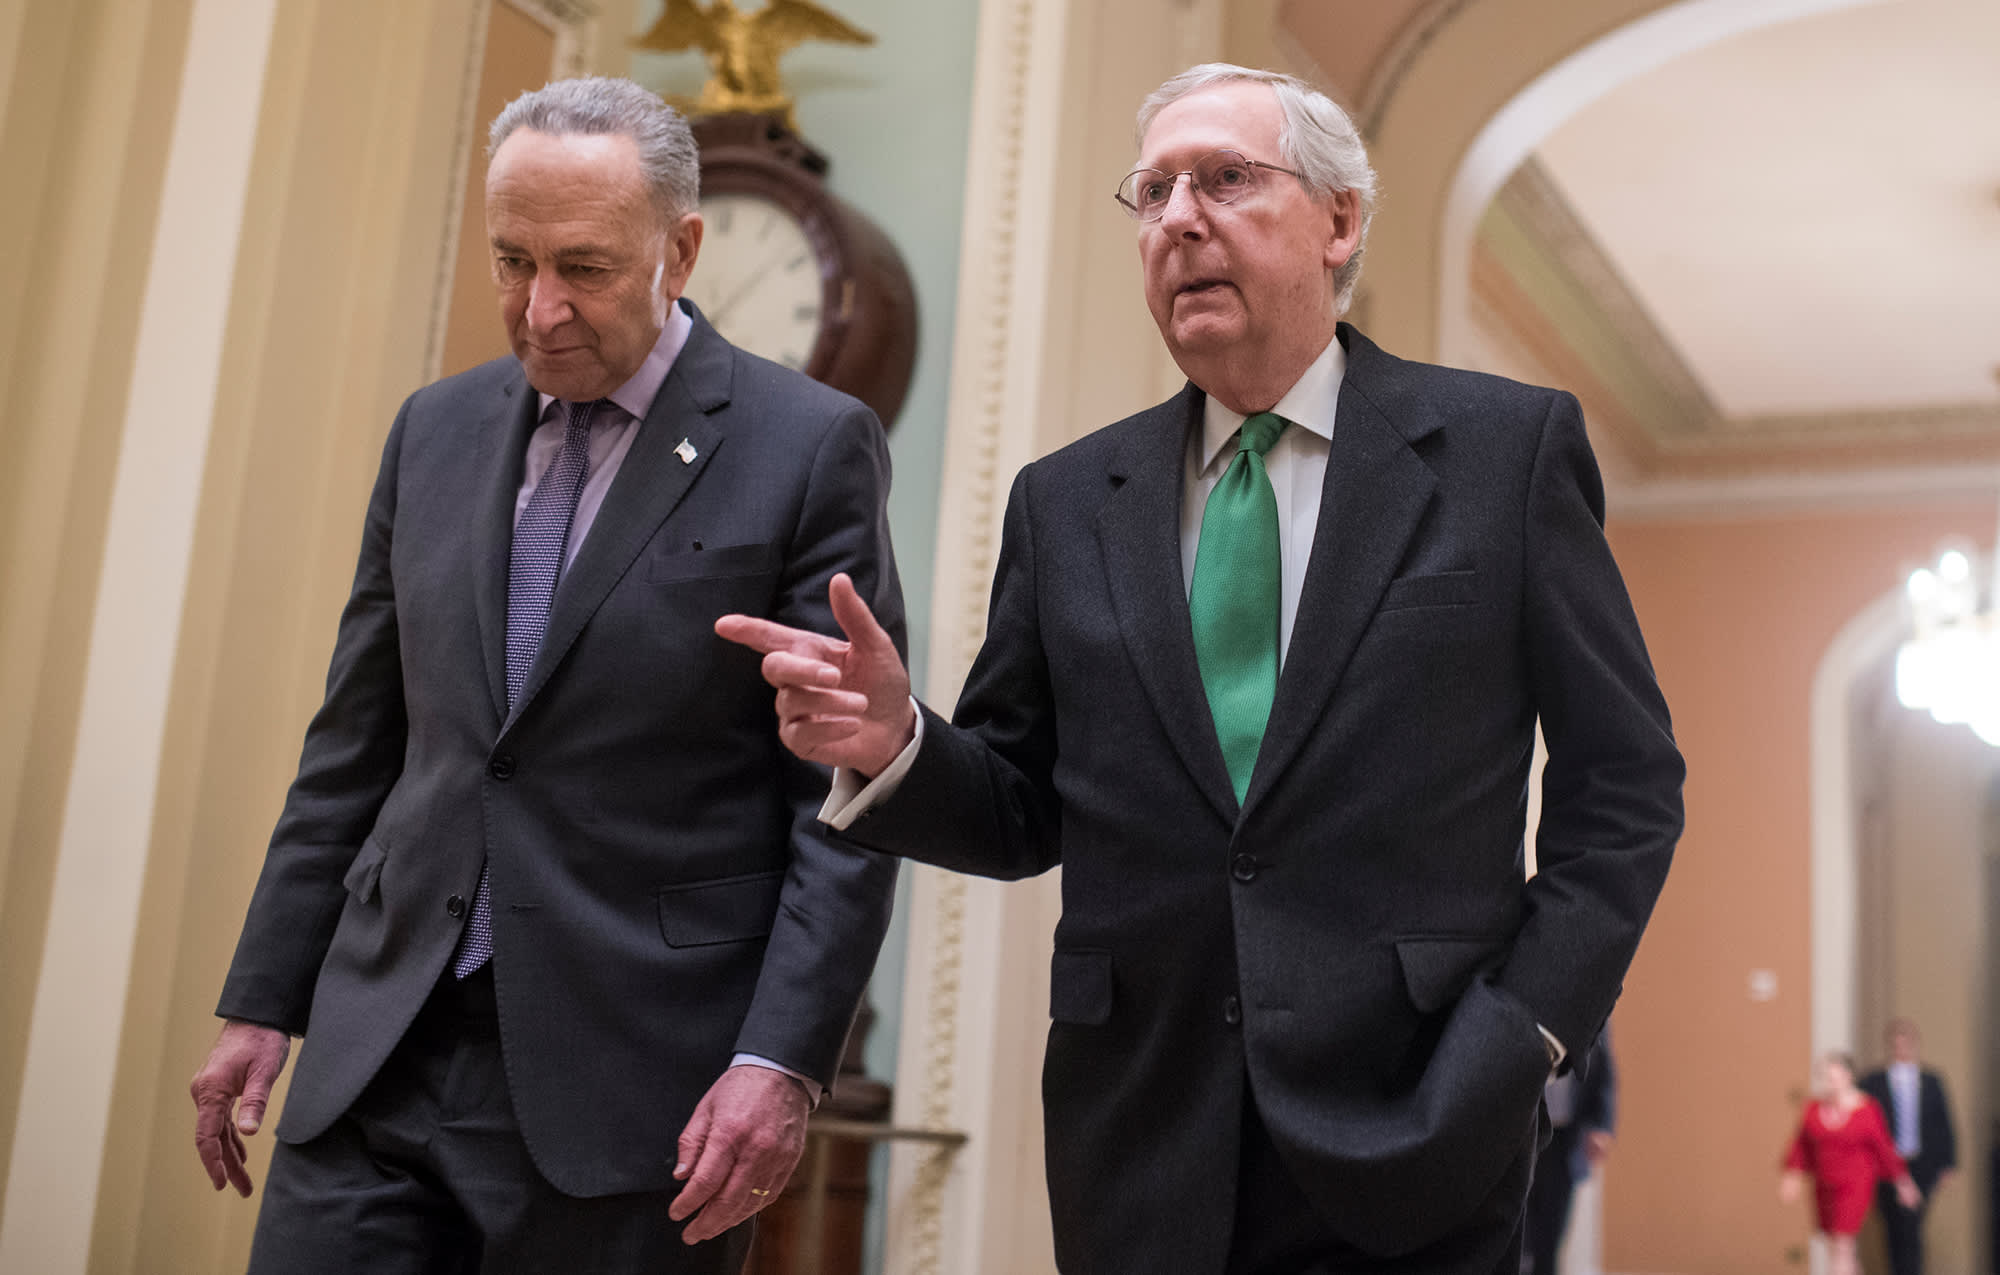 Schumer Mcconnell Retain Senate Leadership Posts After Midterms